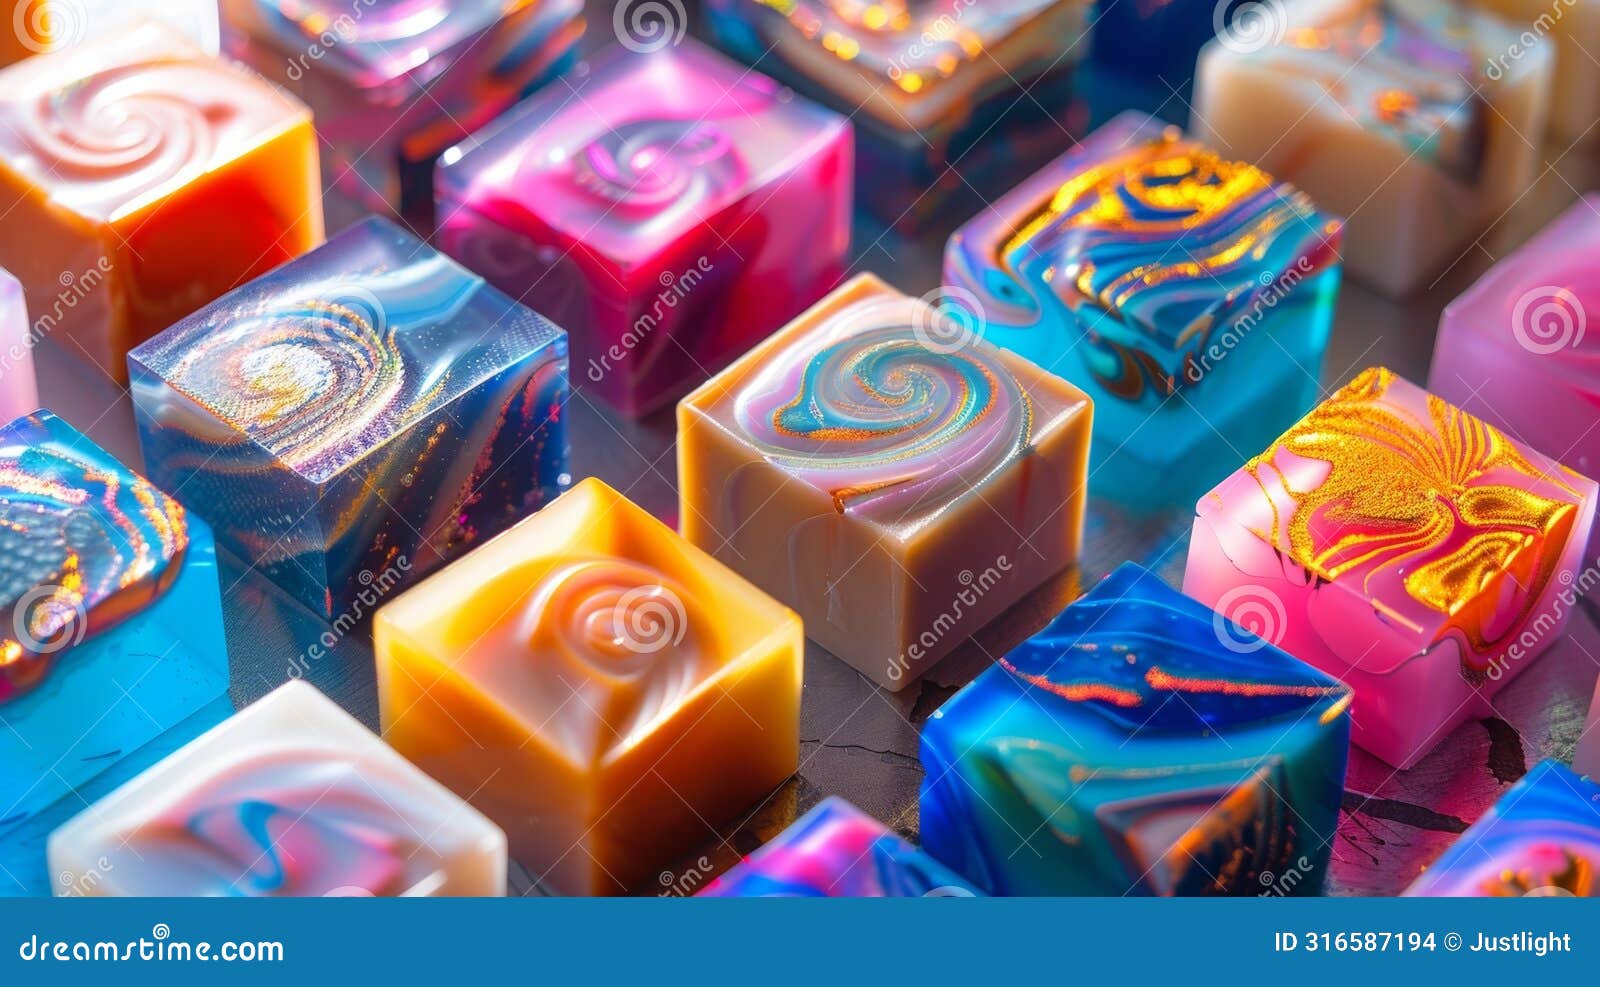 vibrant colors and unique patterns adorn the surface of handcrafted soaps